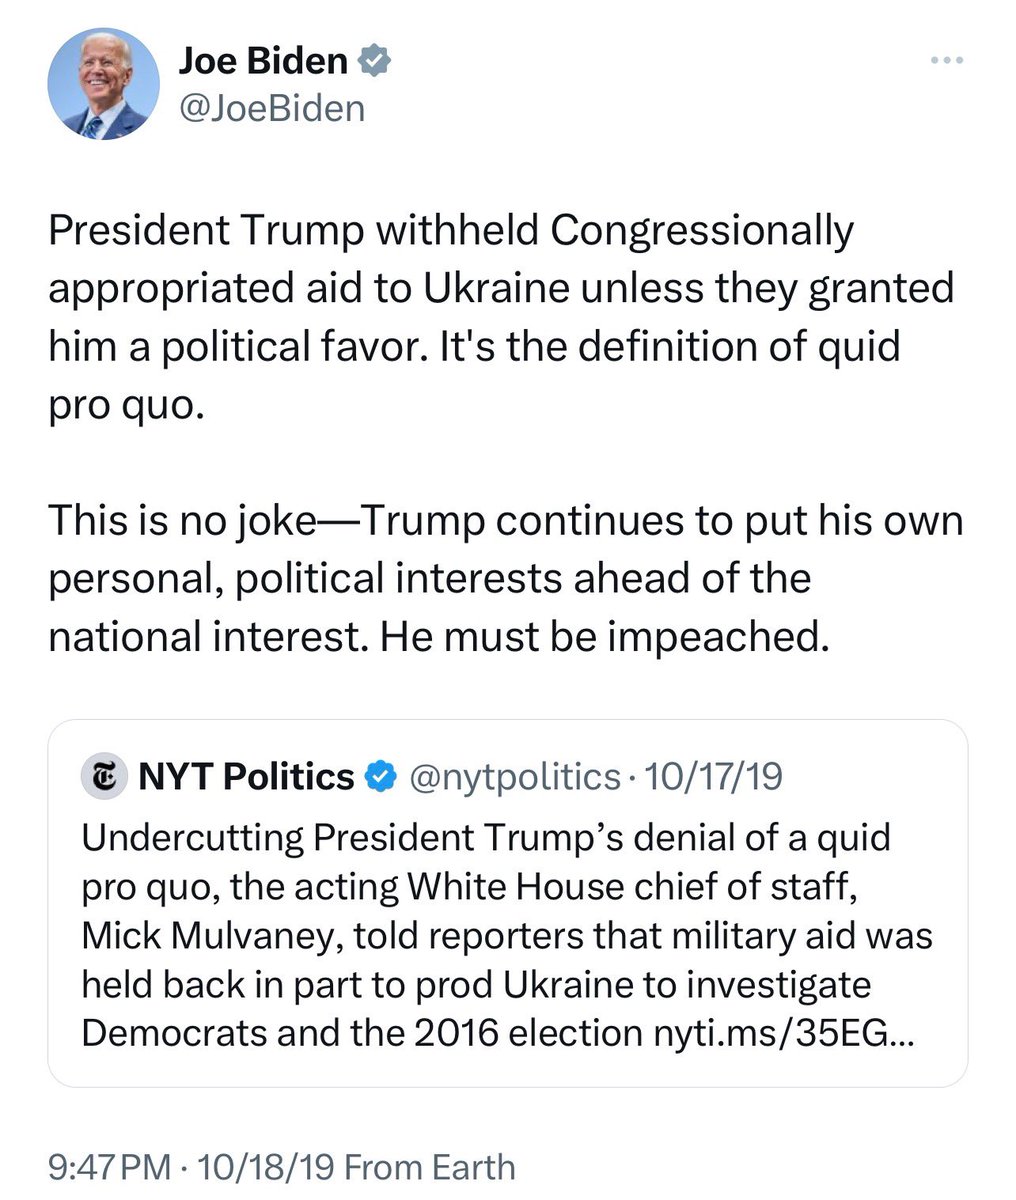 President Biden withheld Congressionally appropriated aid to Israel unless they granted him a political favor. It's the definition of quid pro quo. This is no joke—Biden continues to put his own personal, political interests ahead of the national interest. He must be impeached.